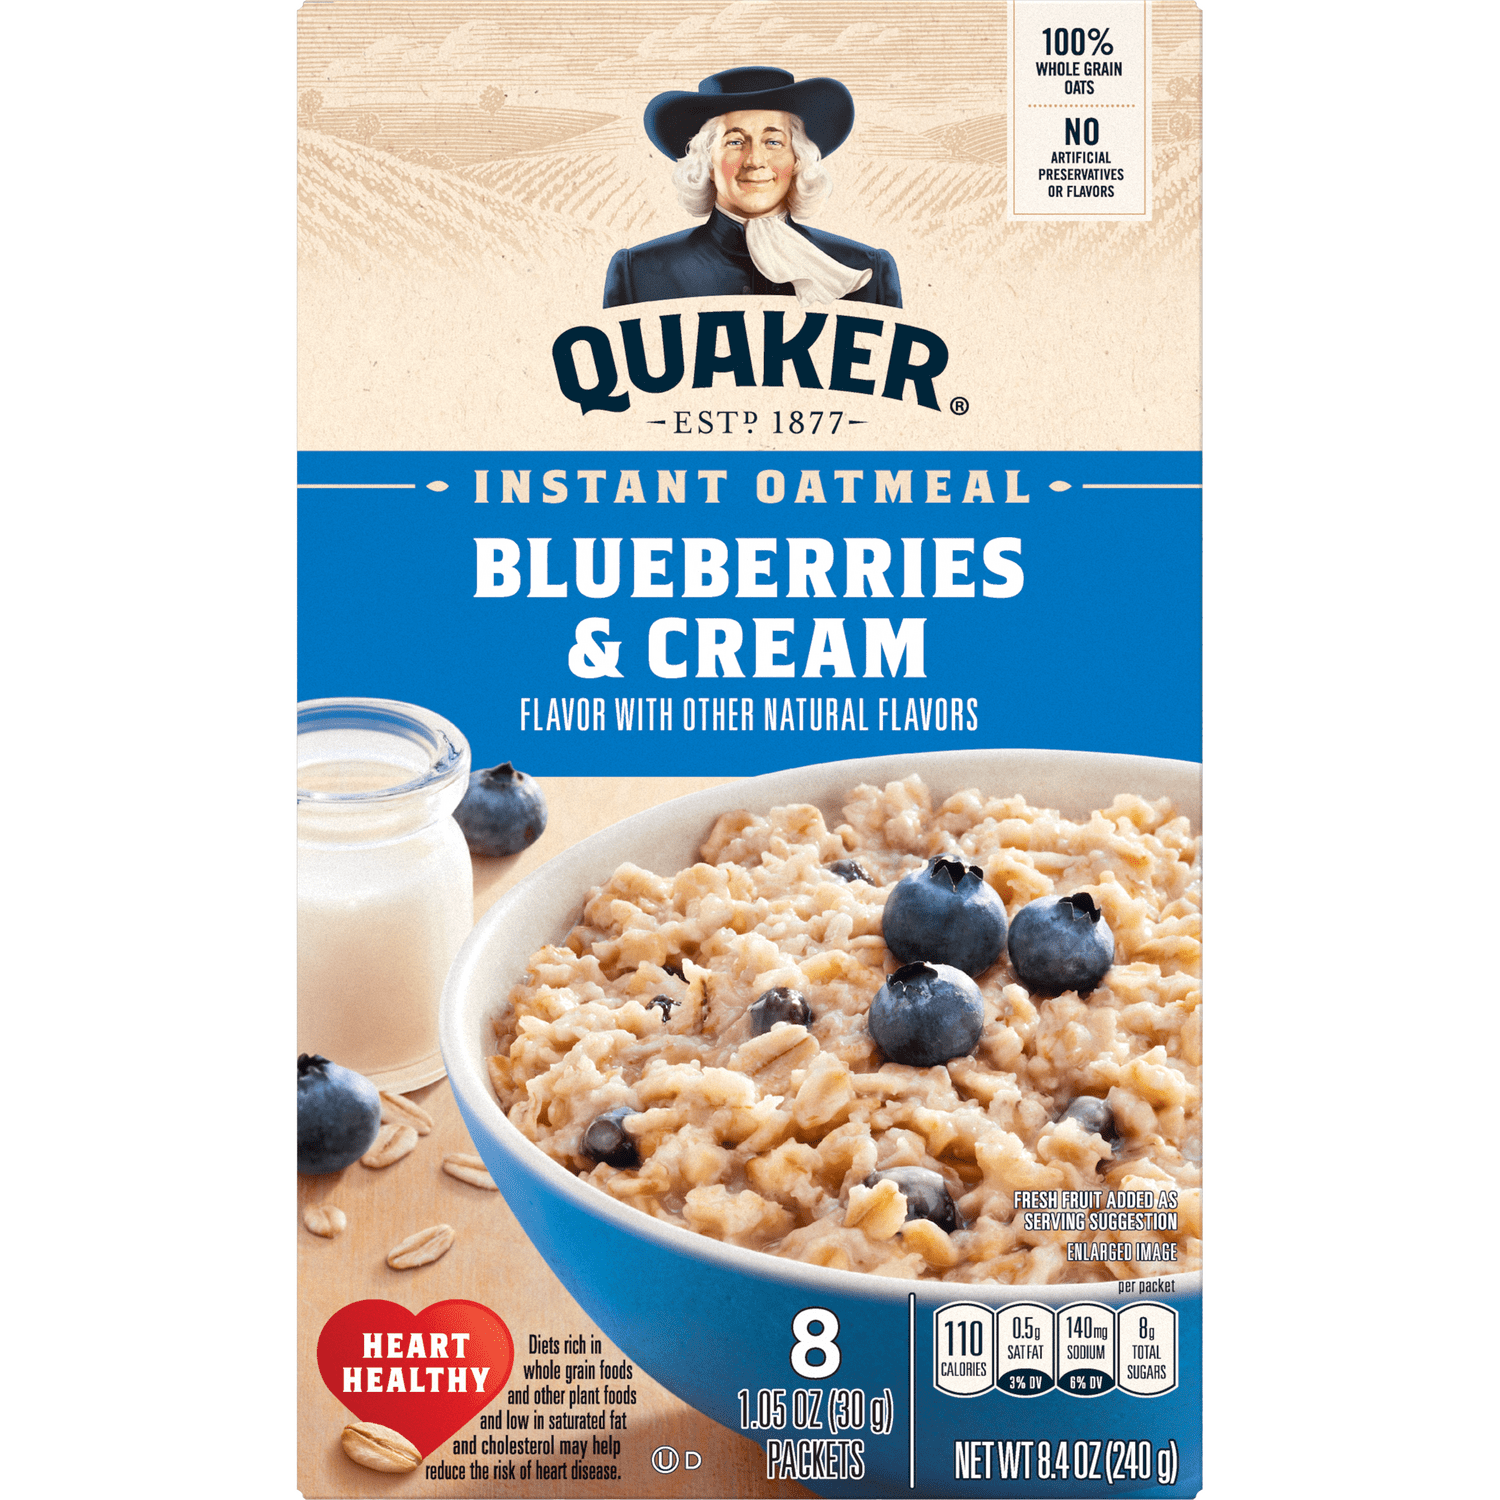 Quaker® Instant Oatmeal - Blueberries & Cream package 